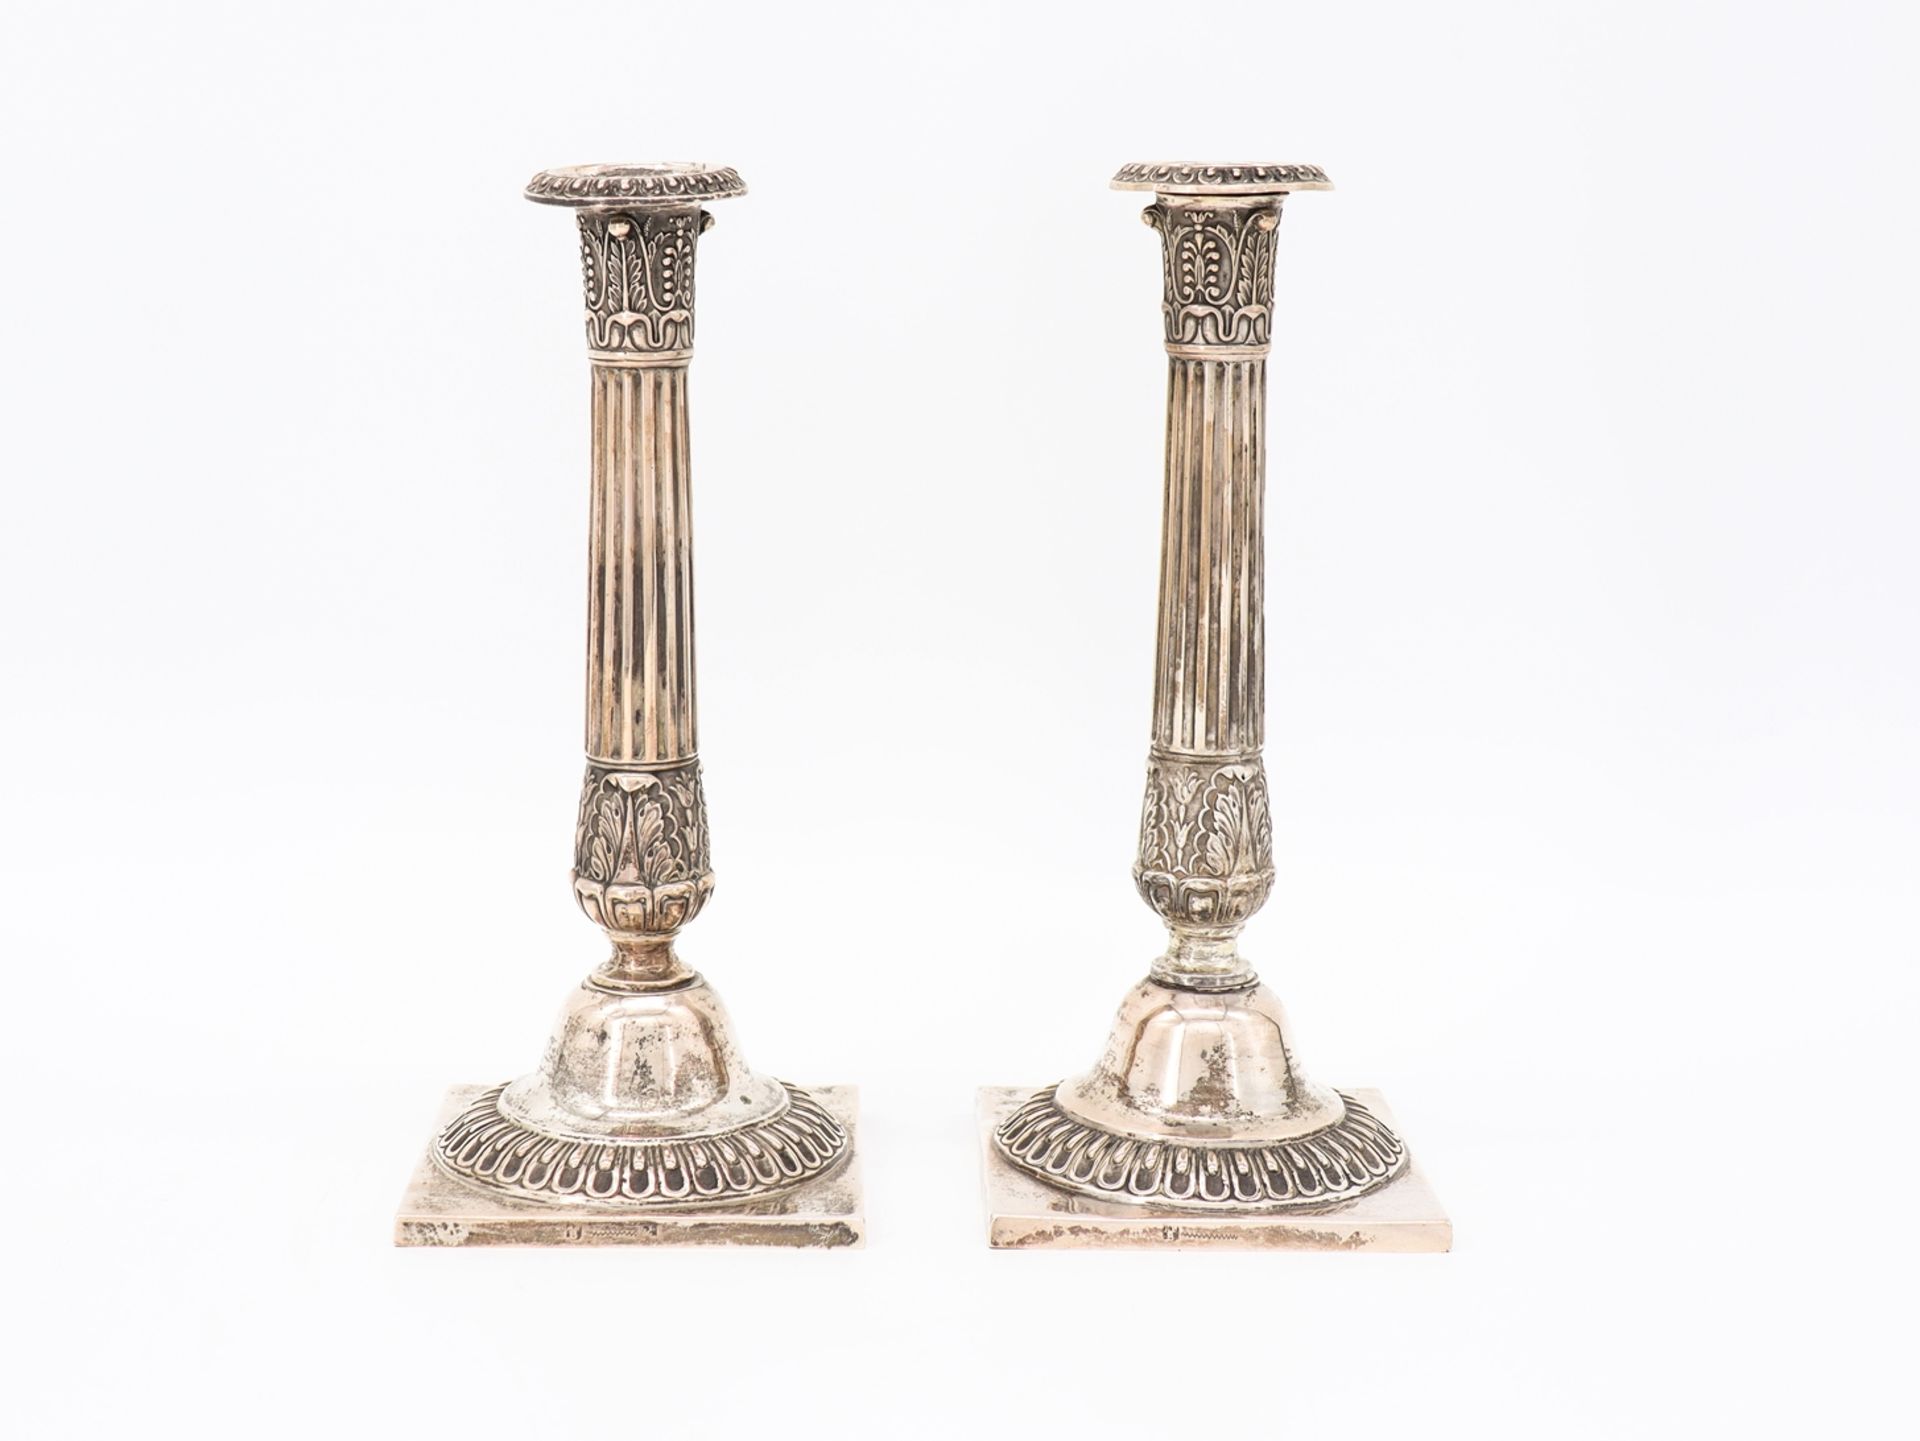 Anton Friedrich Burgmüller, Weissenfels, Pair of Empire candlesticks, early 19th century. - Image 7 of 7